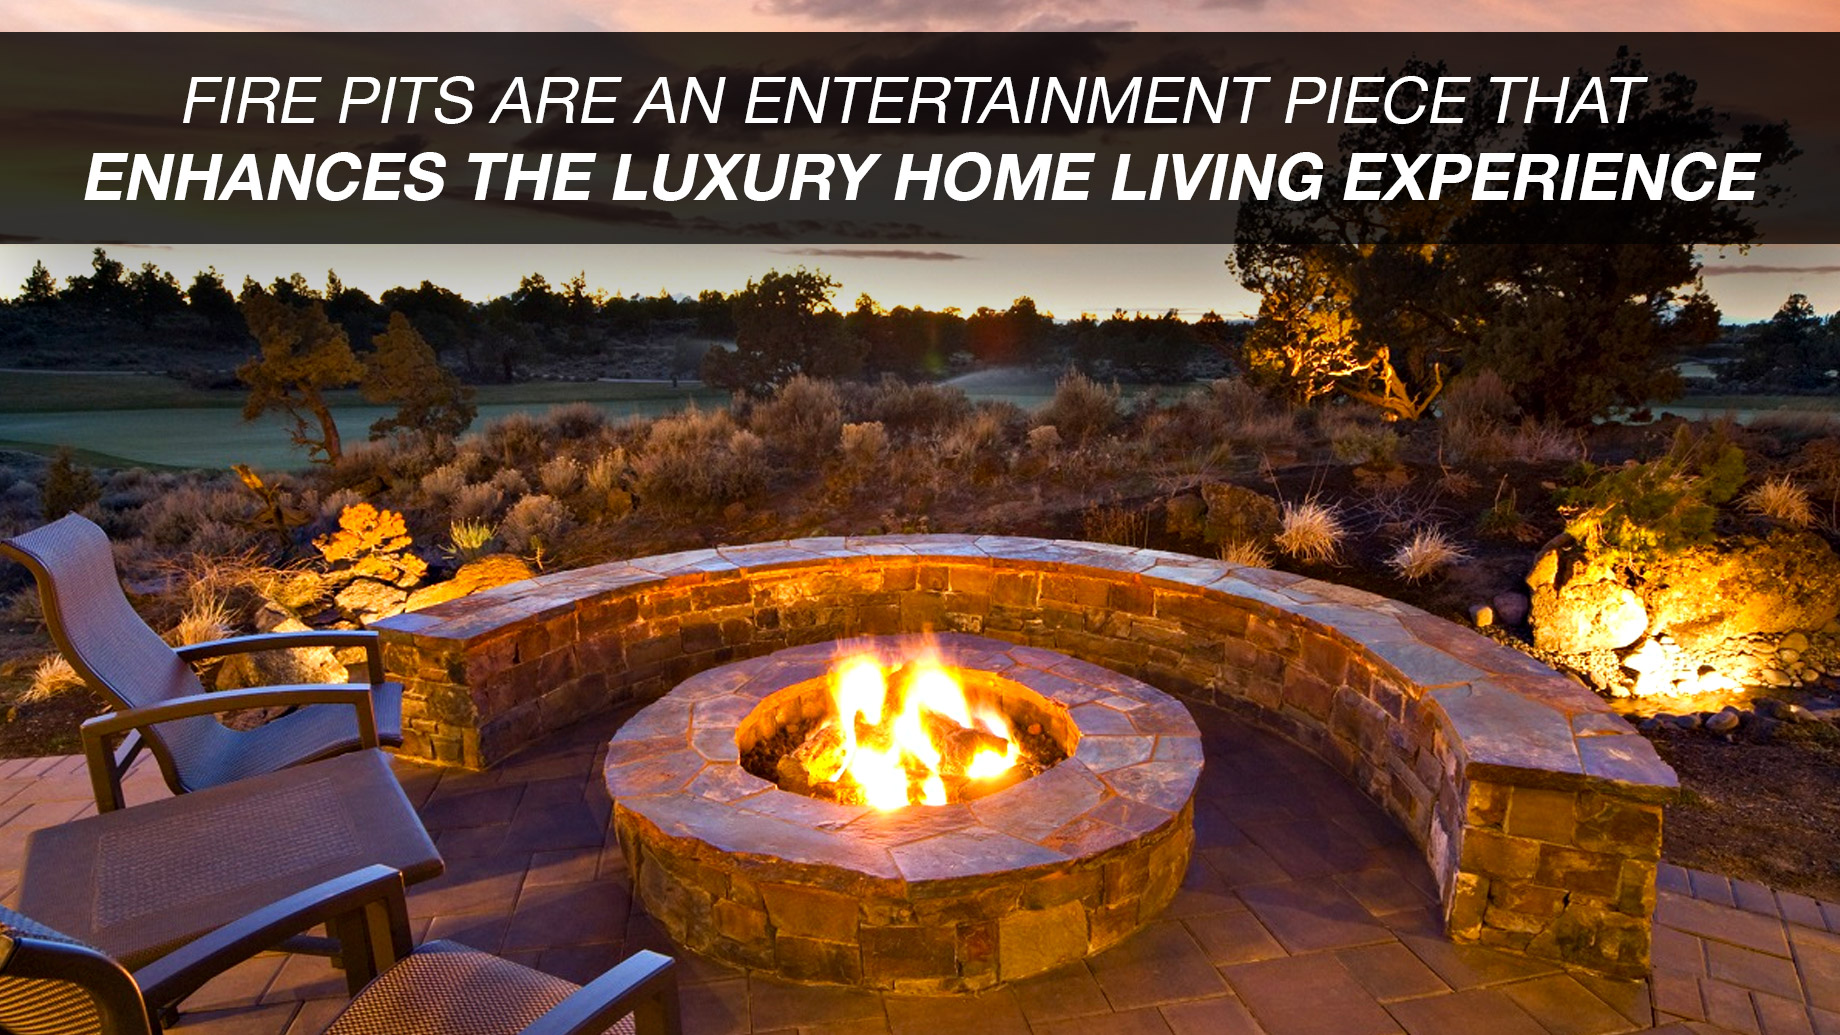 Fire Pits Are An Entertainment Piece That Enhances The Luxury Home Living Experience